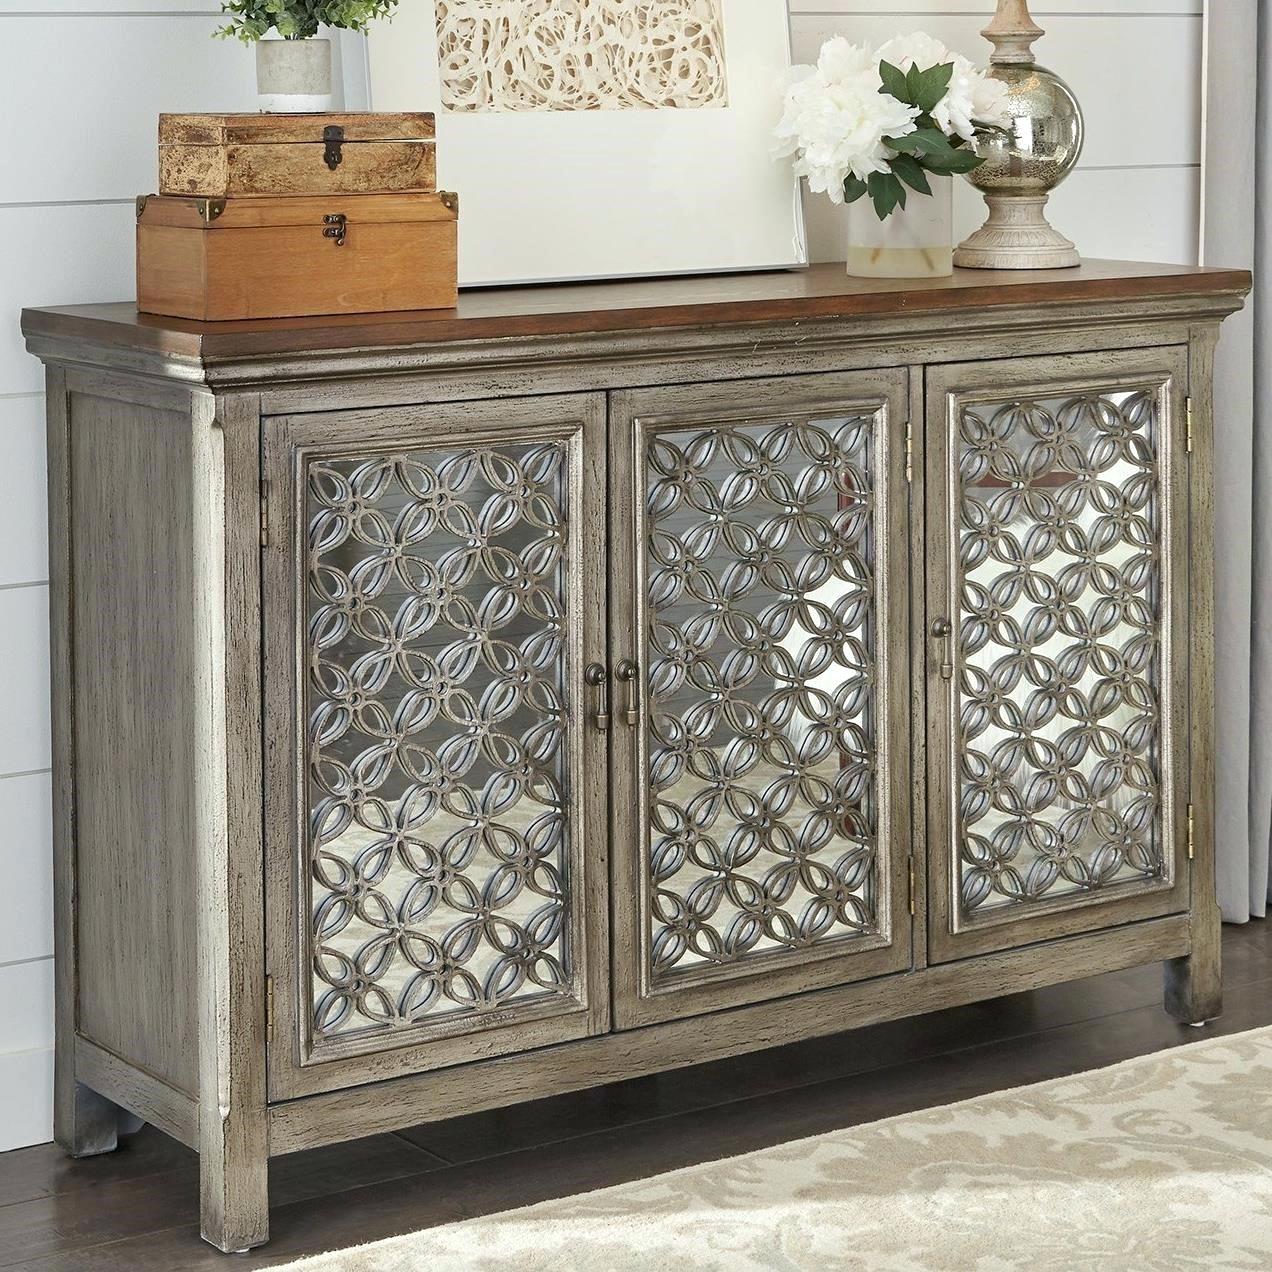 accent chest target buzzcomputers club liberty furniture eclectic living accents transitional door with adjustable interior shelf chests and cabinets fretwork table small kitchen